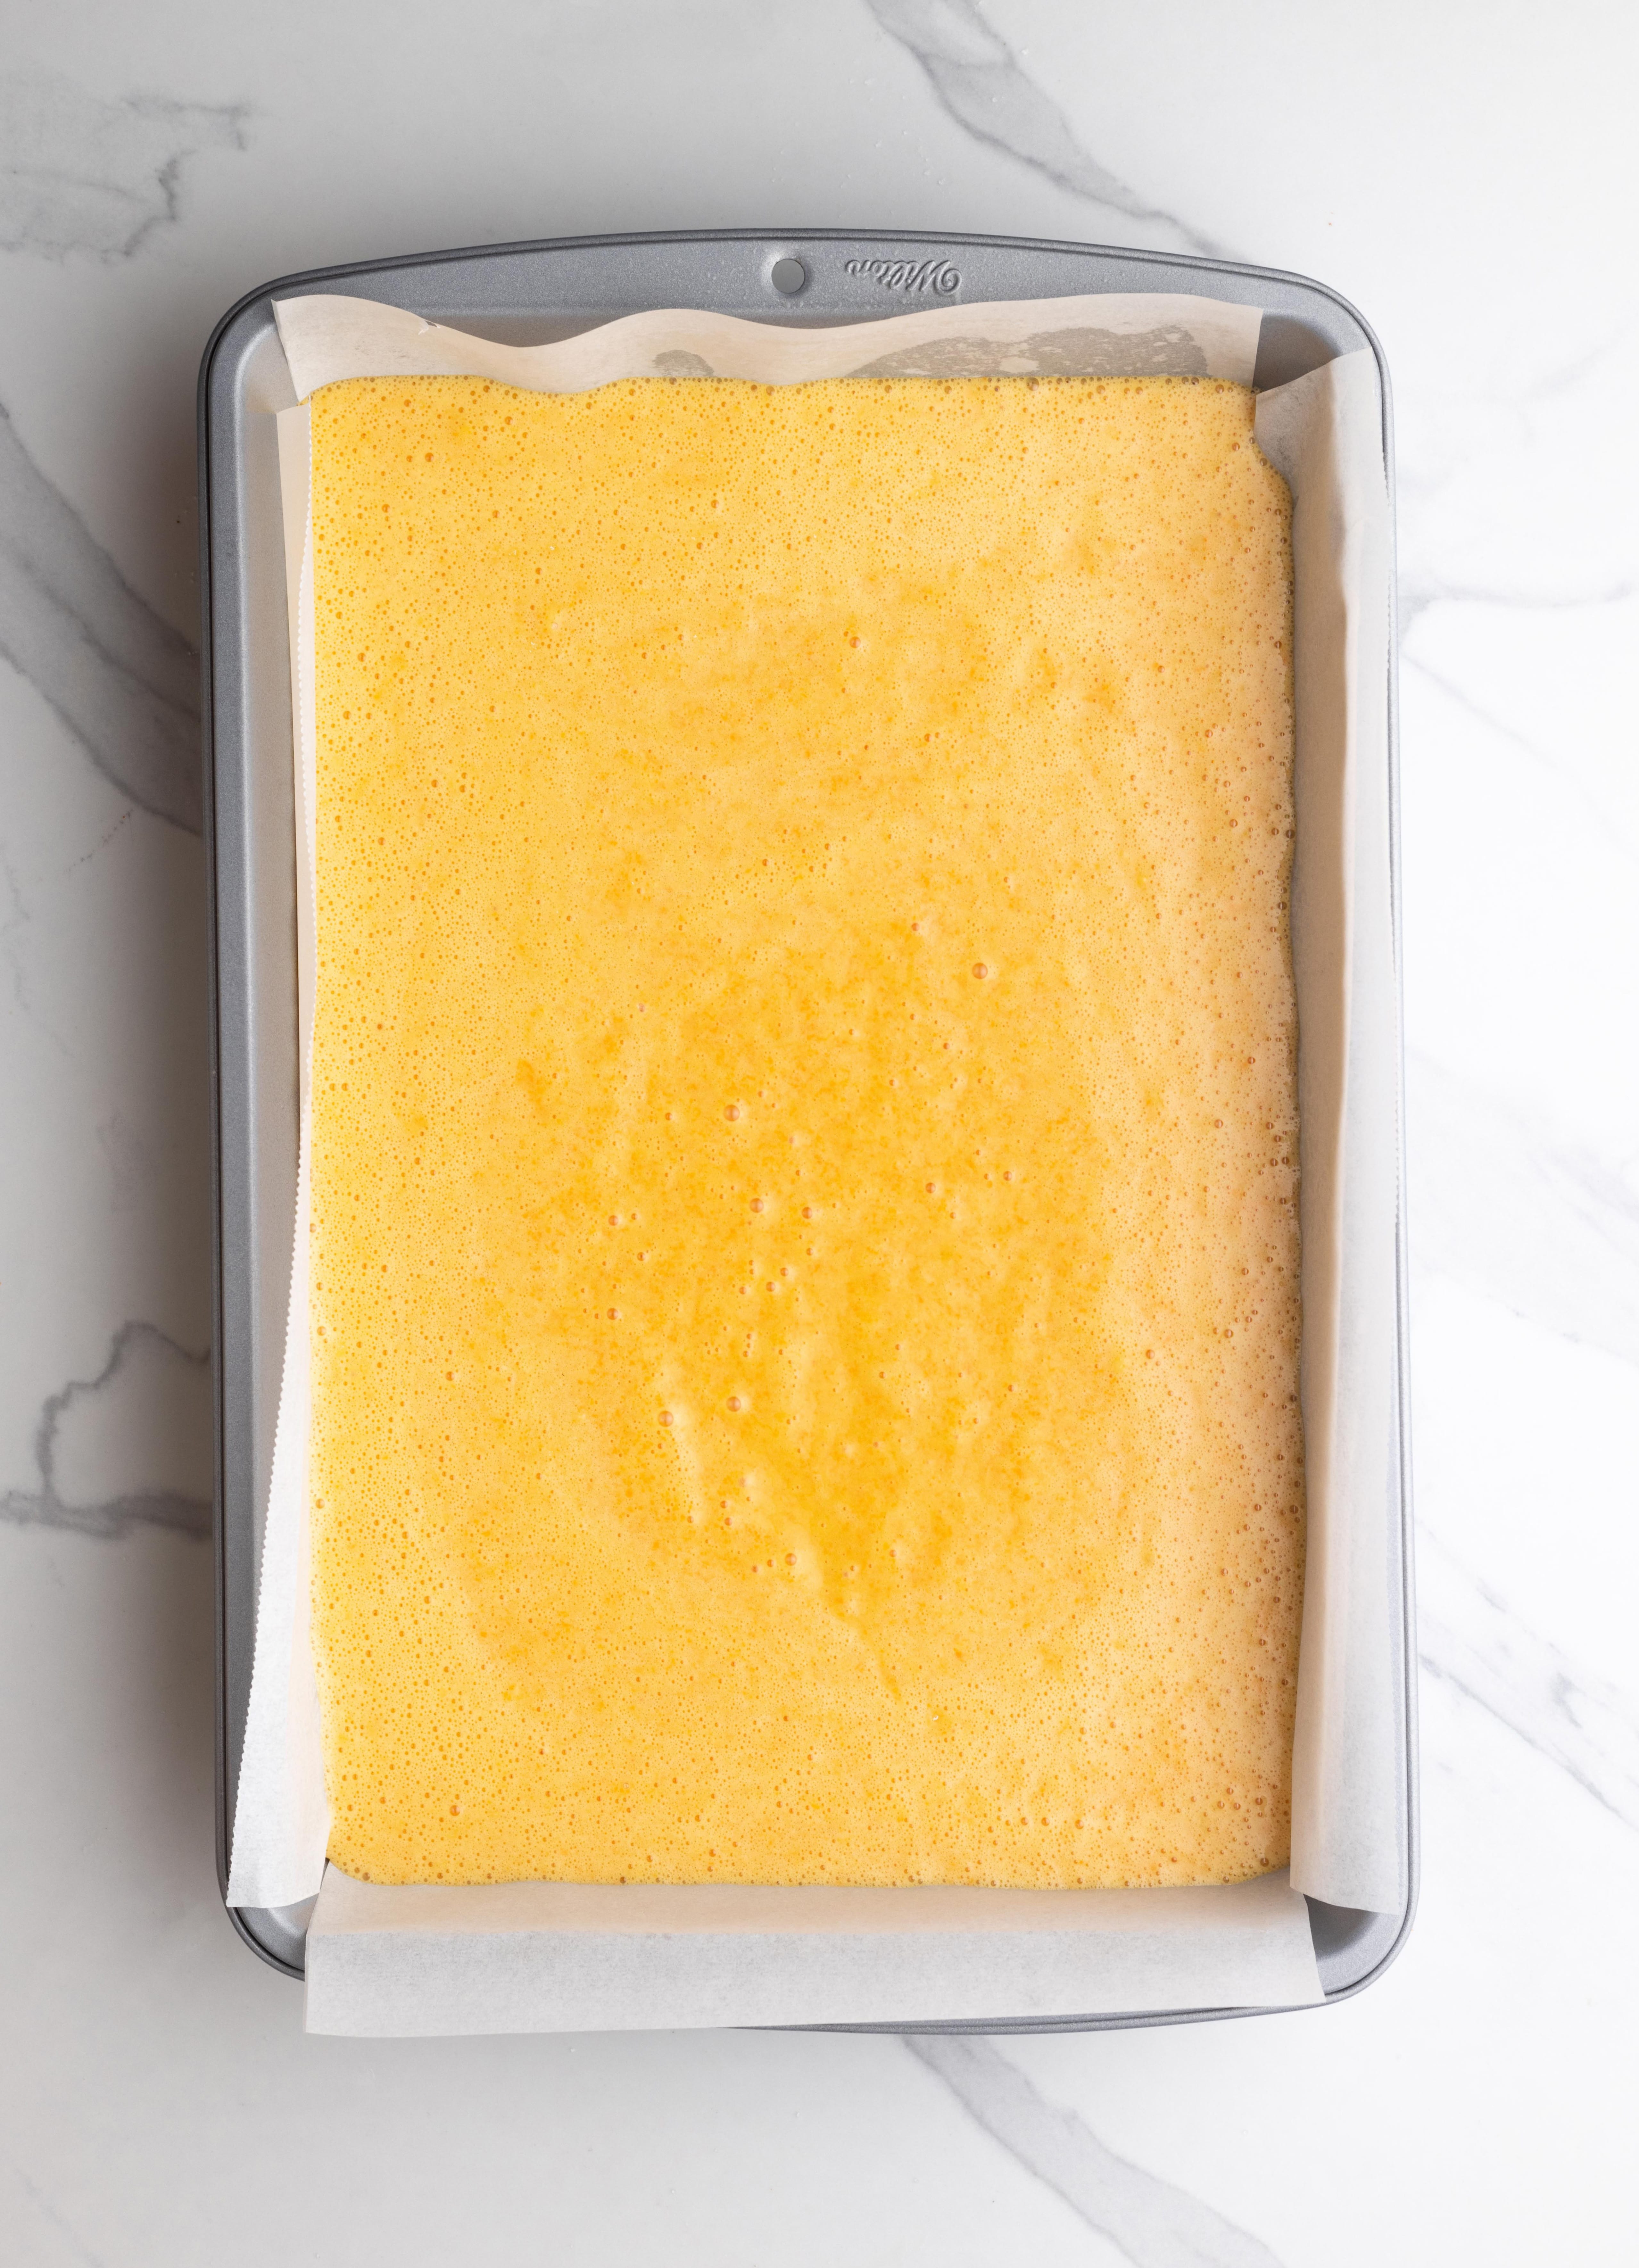 a rectangular cake pan lined with parchment paper and filled with Brazilian carrot cake batter.